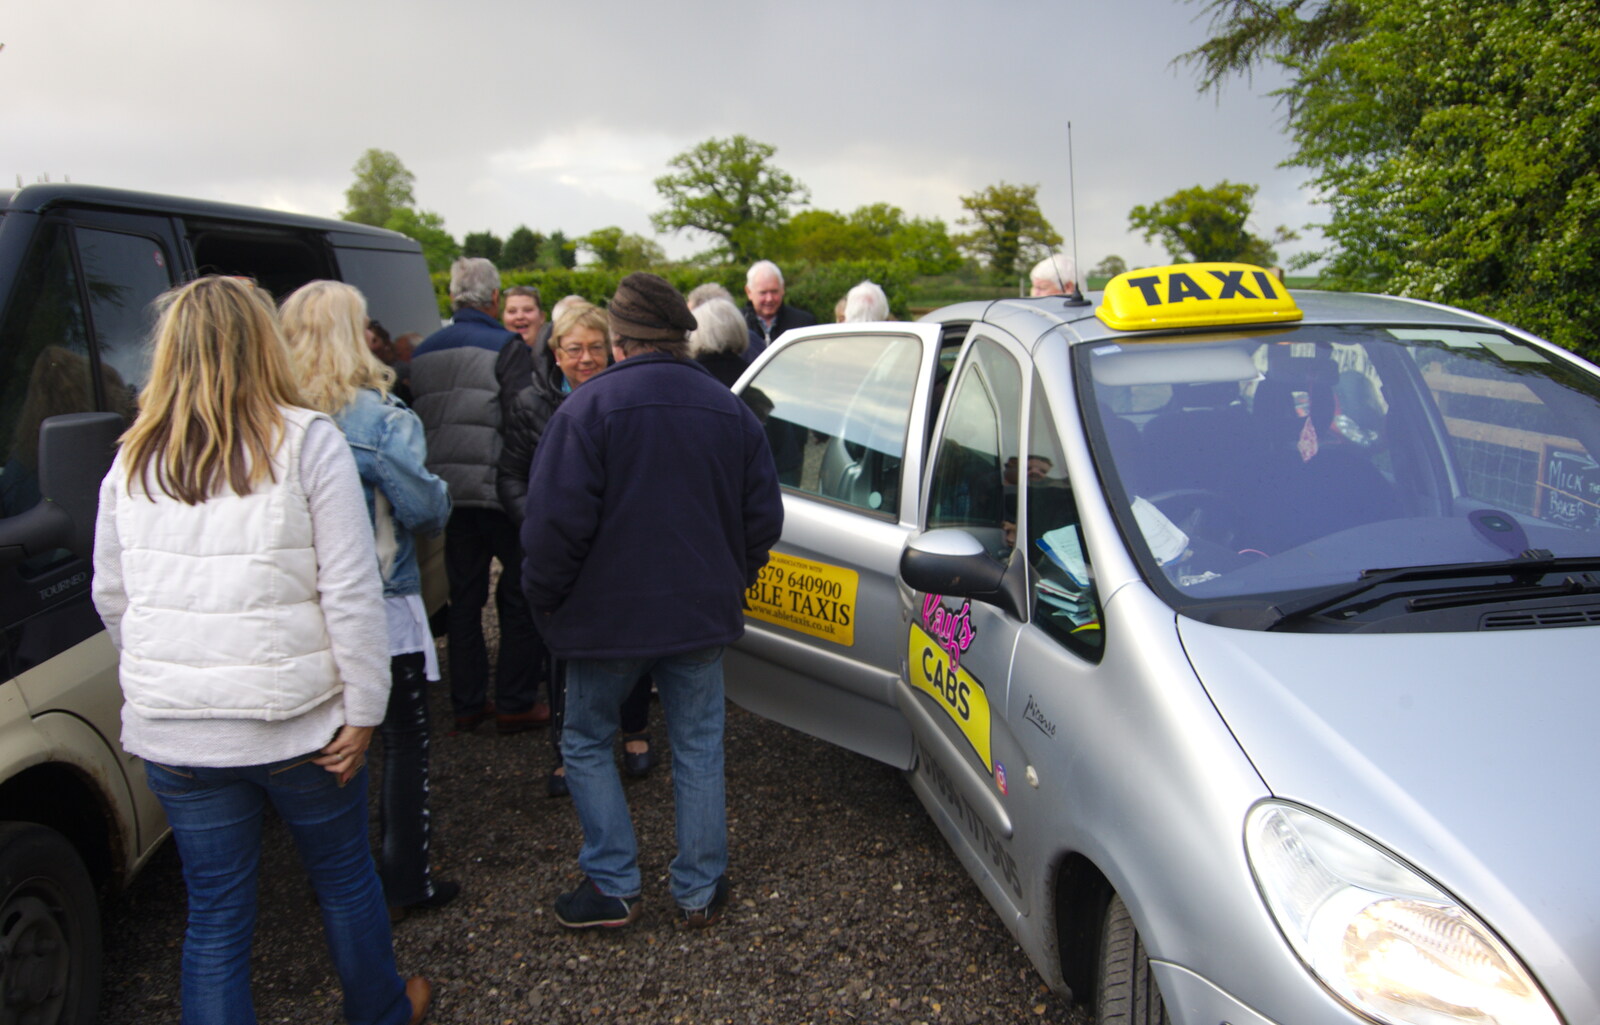 Outside, there's a taxi melée from The Opening of Star Wing Brewery's Tap Room, Redgrave, Suffolk - 4th May 2019